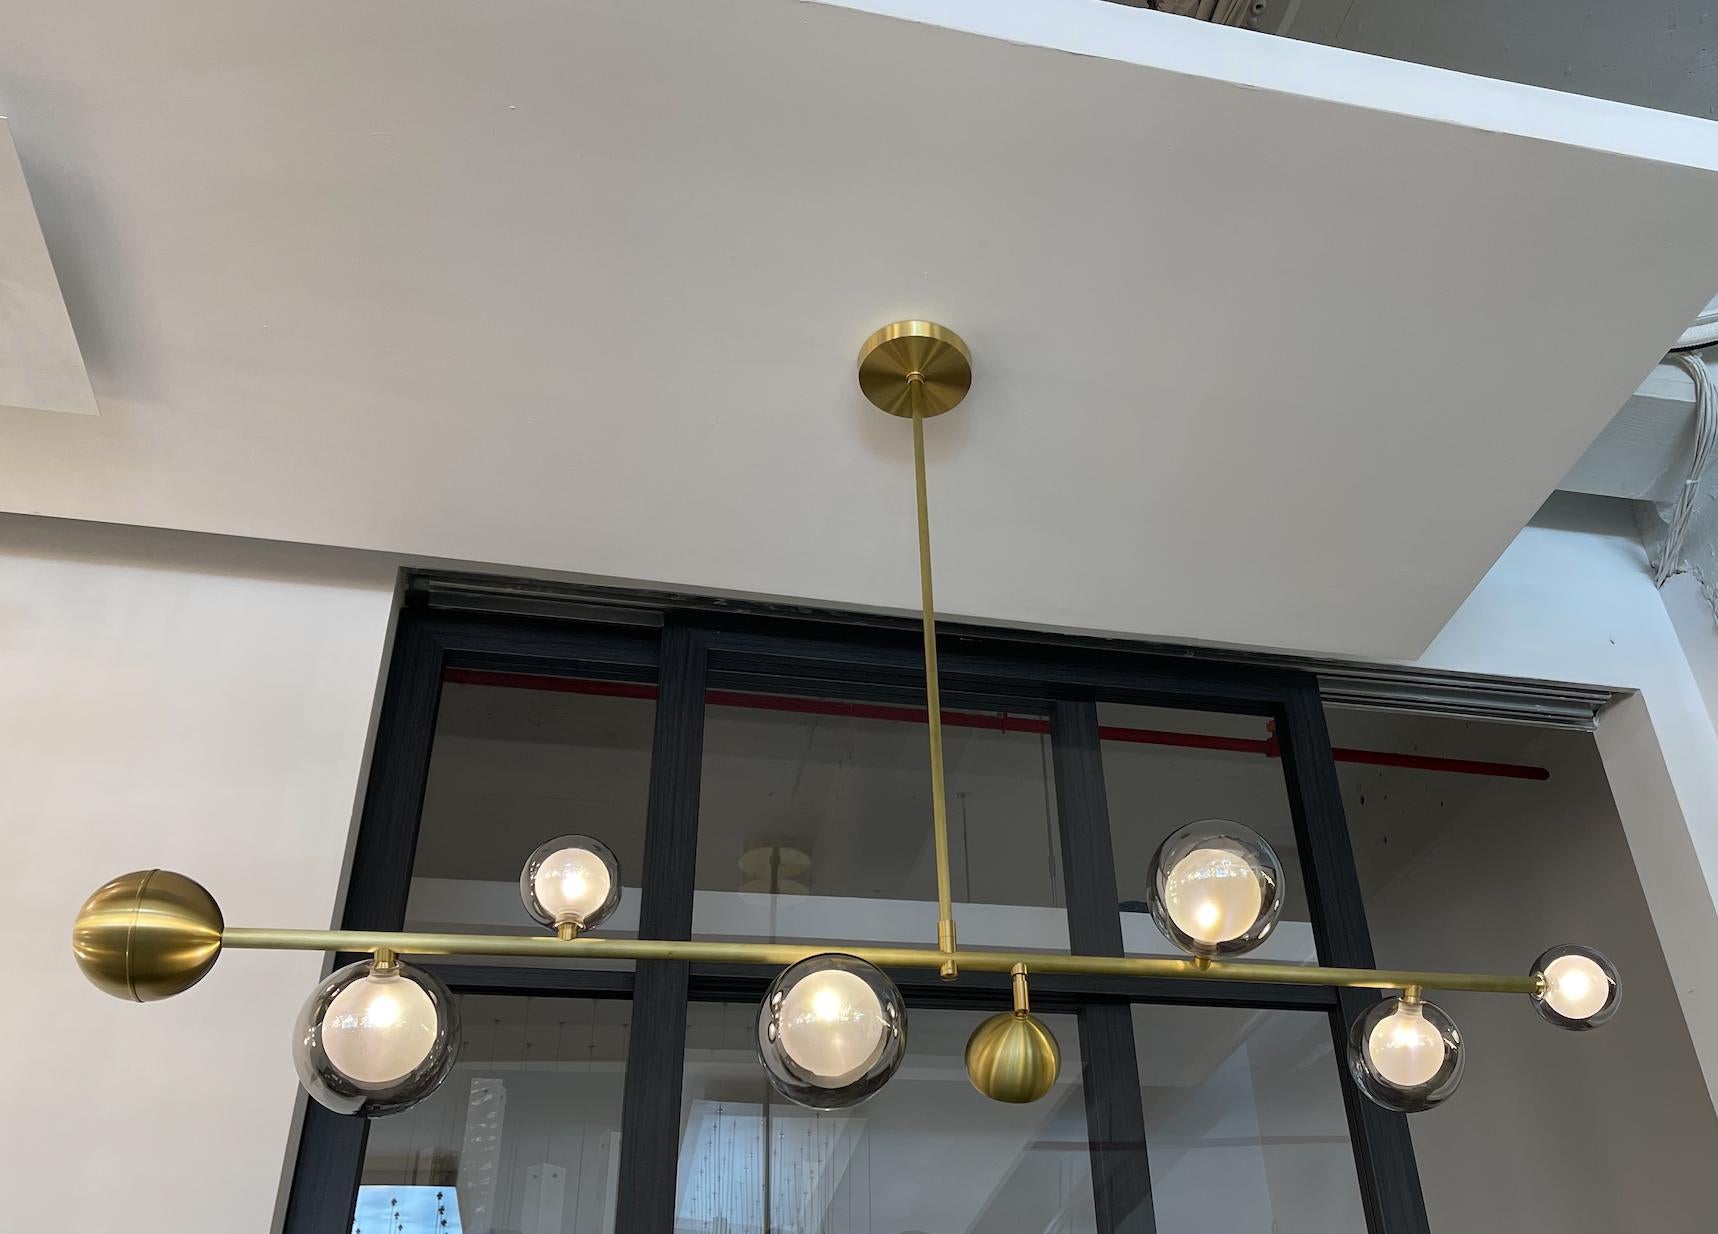 A chandelier consisting of a horizontal metal rod attached to the ceiling by a vertical rod in the middle and of Kadur glass pendants and metal orbs on the horizontal rod which provide multiple sources of light. The central metal orb contains an